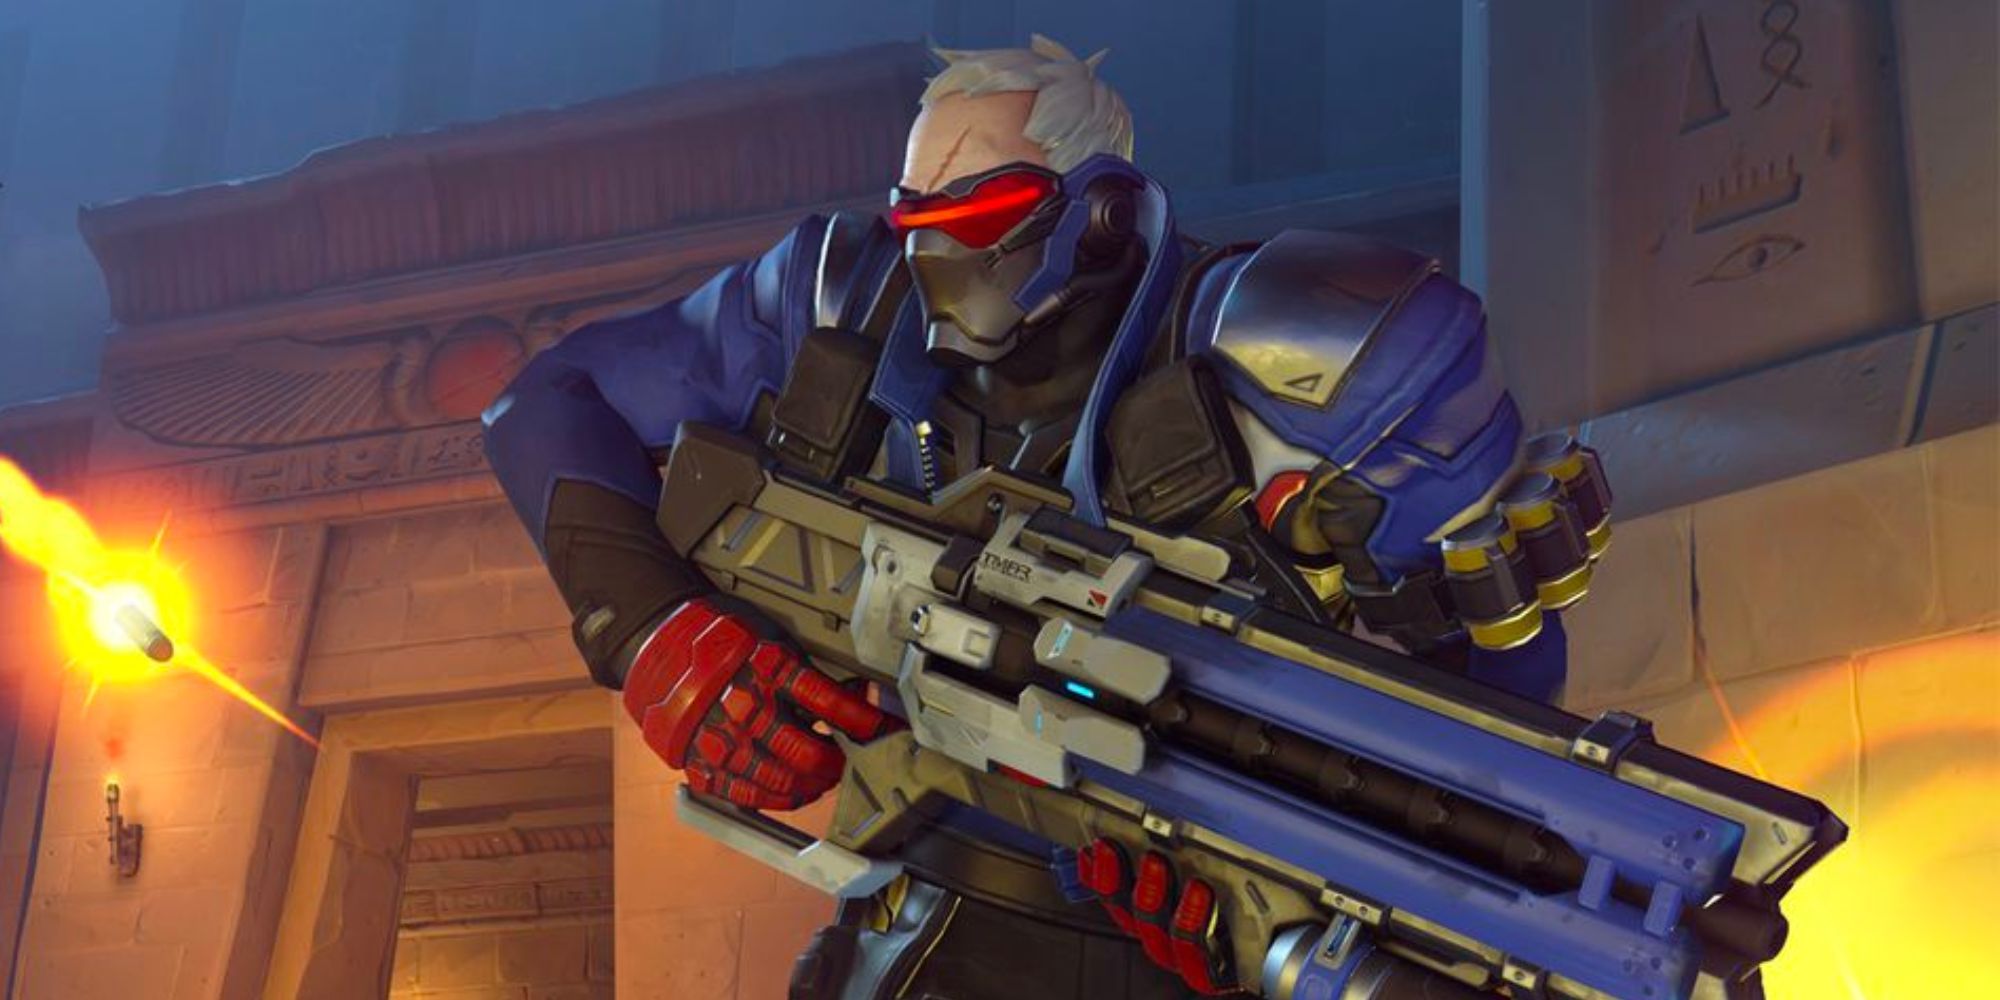 Soldier: 76 Running with Pulse Rifle